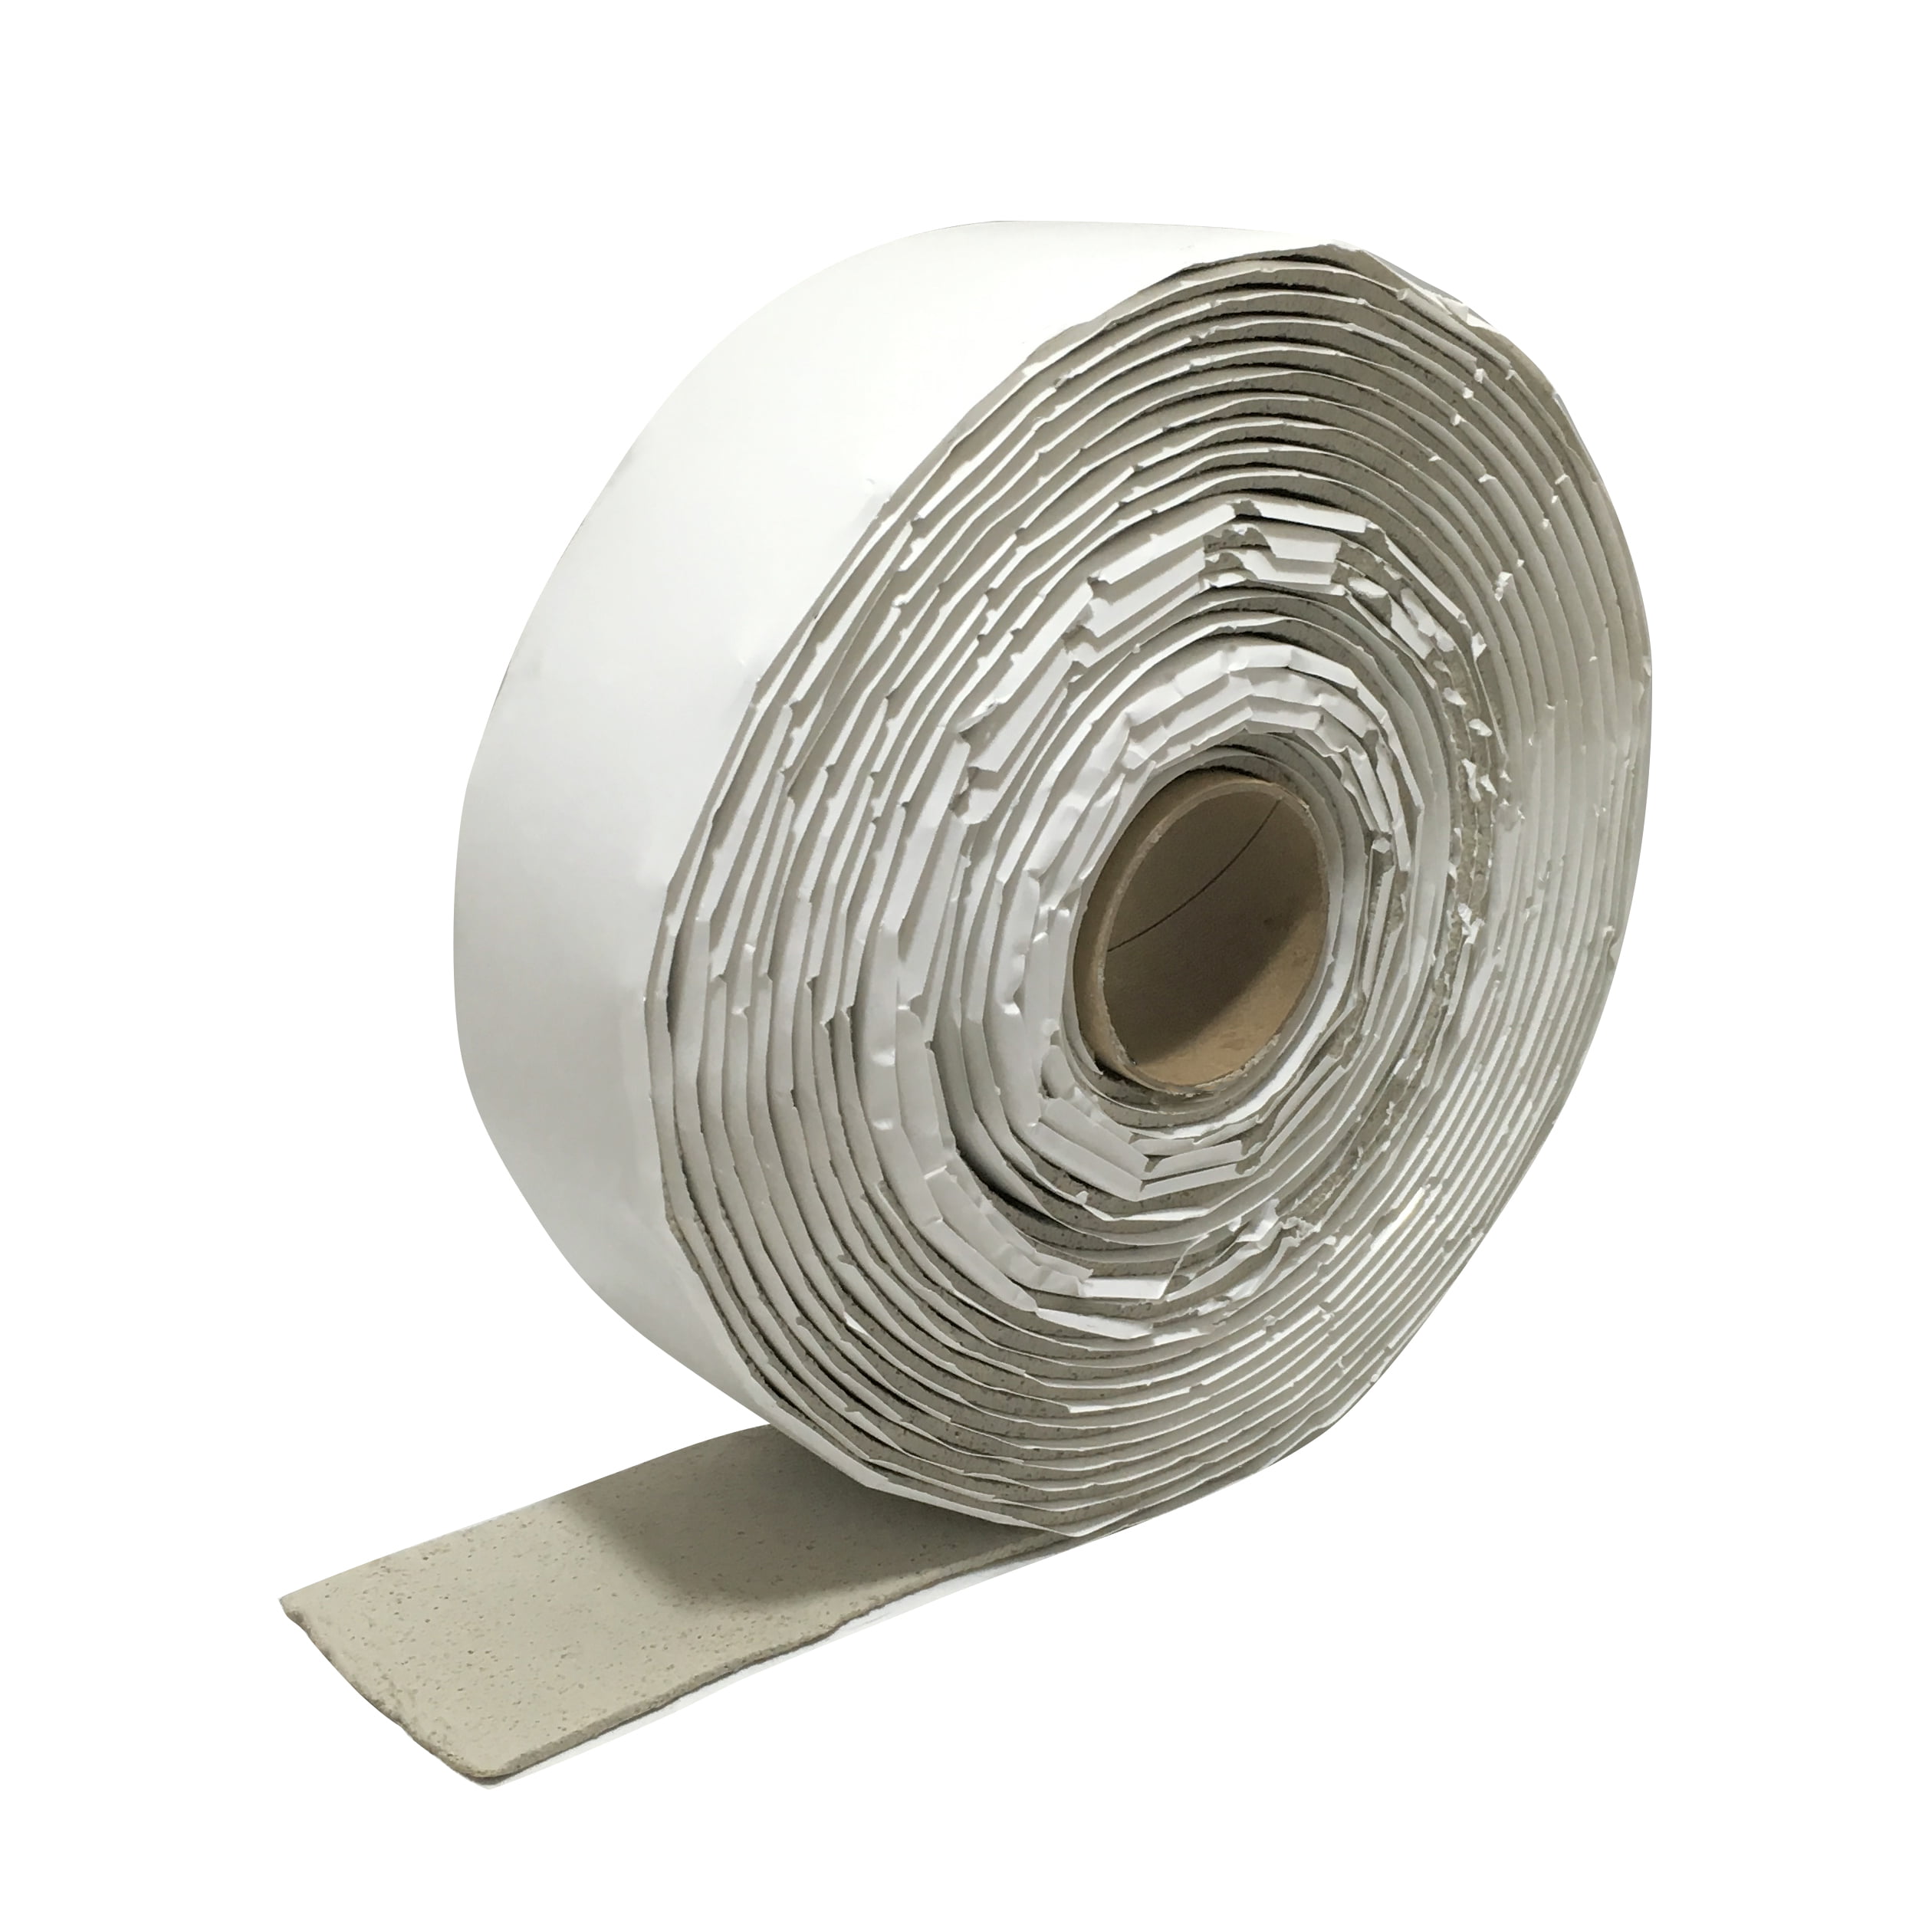 2 Pack 6x25 Reflective Pipe Wrap Sealer Insulation Kit Foam Core w/ 15ft Tape R7 